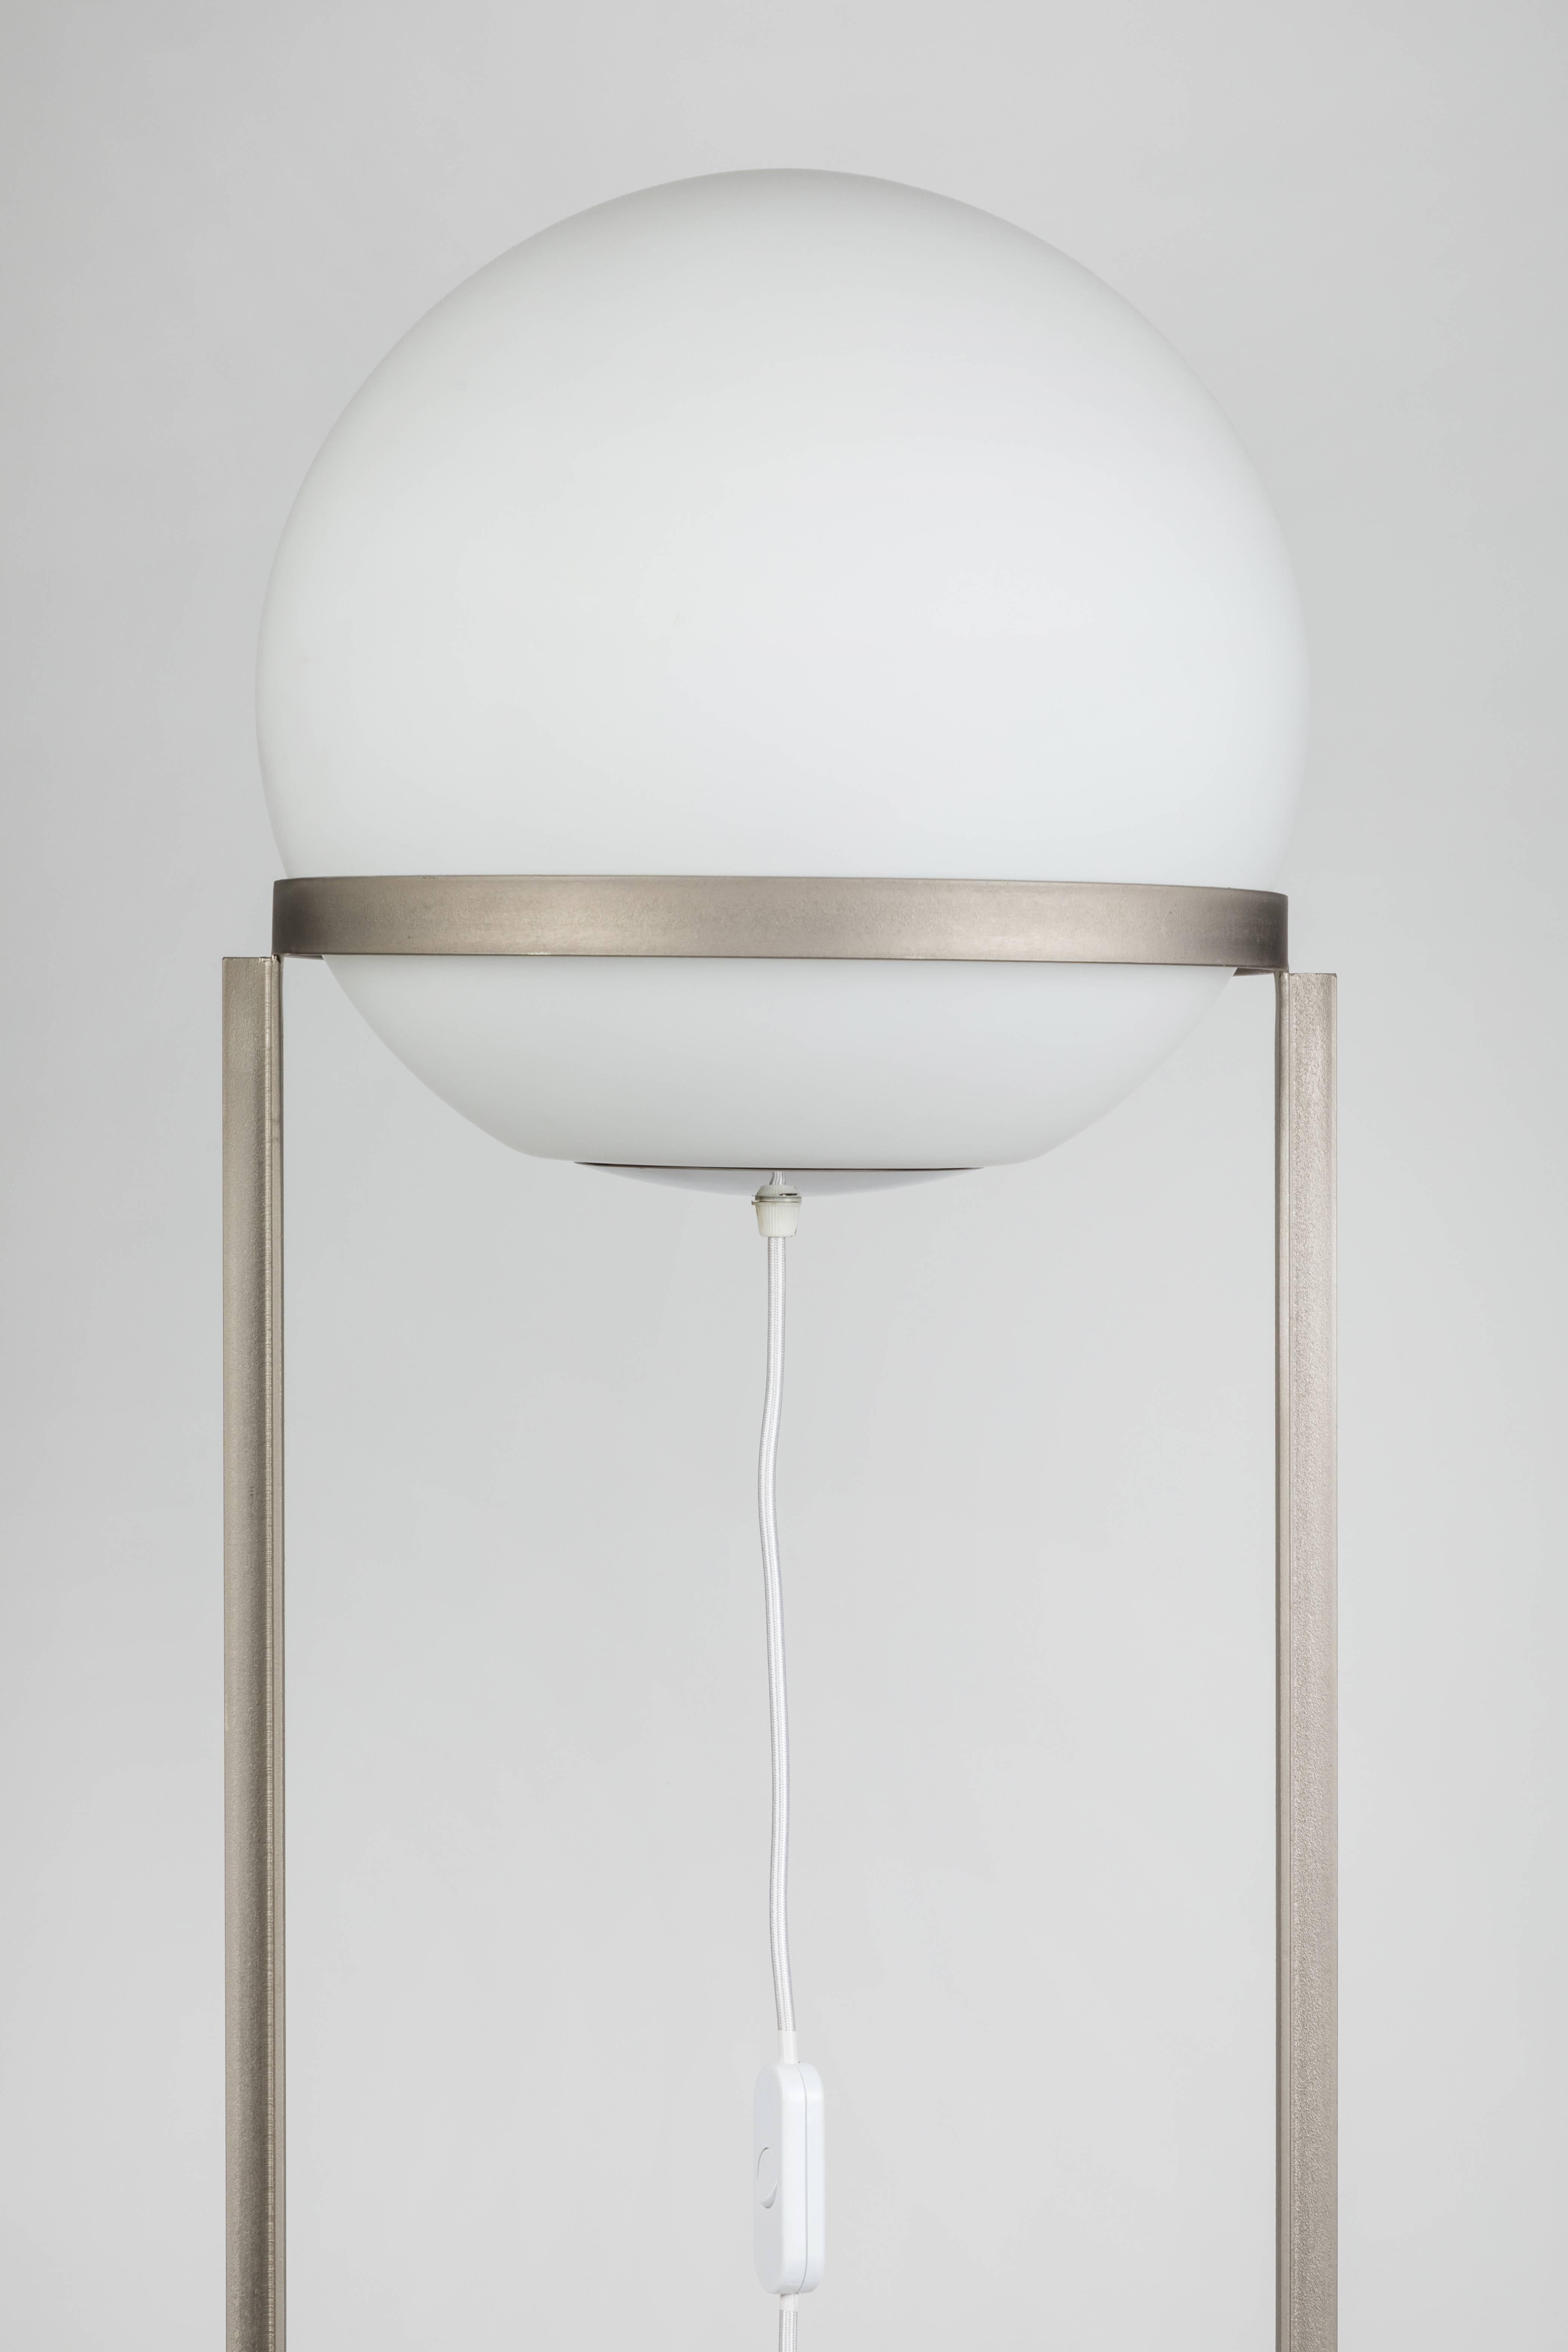 Plated Limited Edition Carl Auböck Model 4095 Floor Lamp For Sale